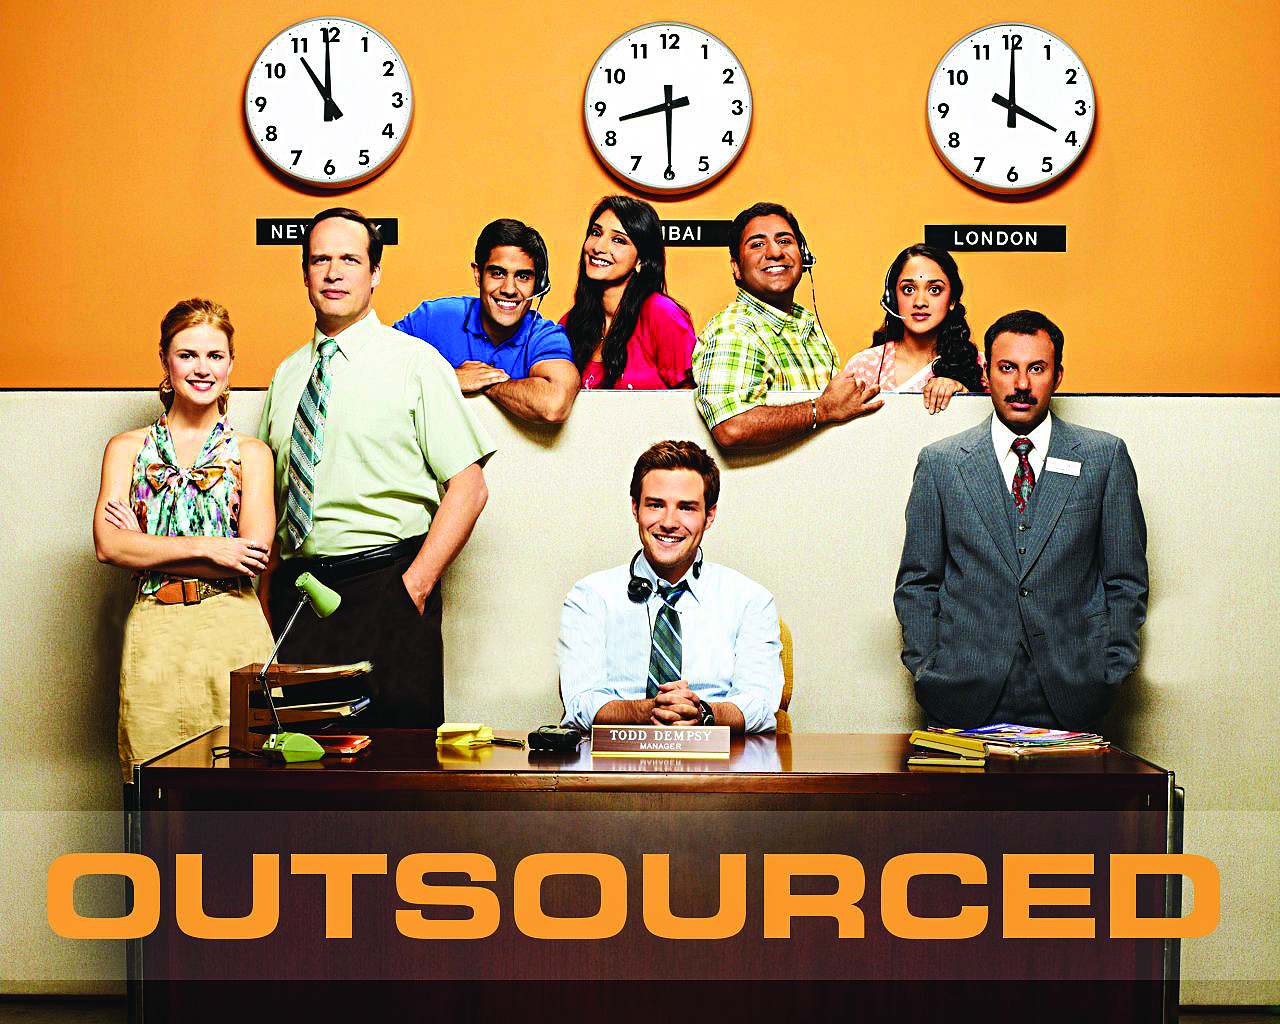 Oman Weekend Download: Watch Diwali Special Outsourced this Weekend!